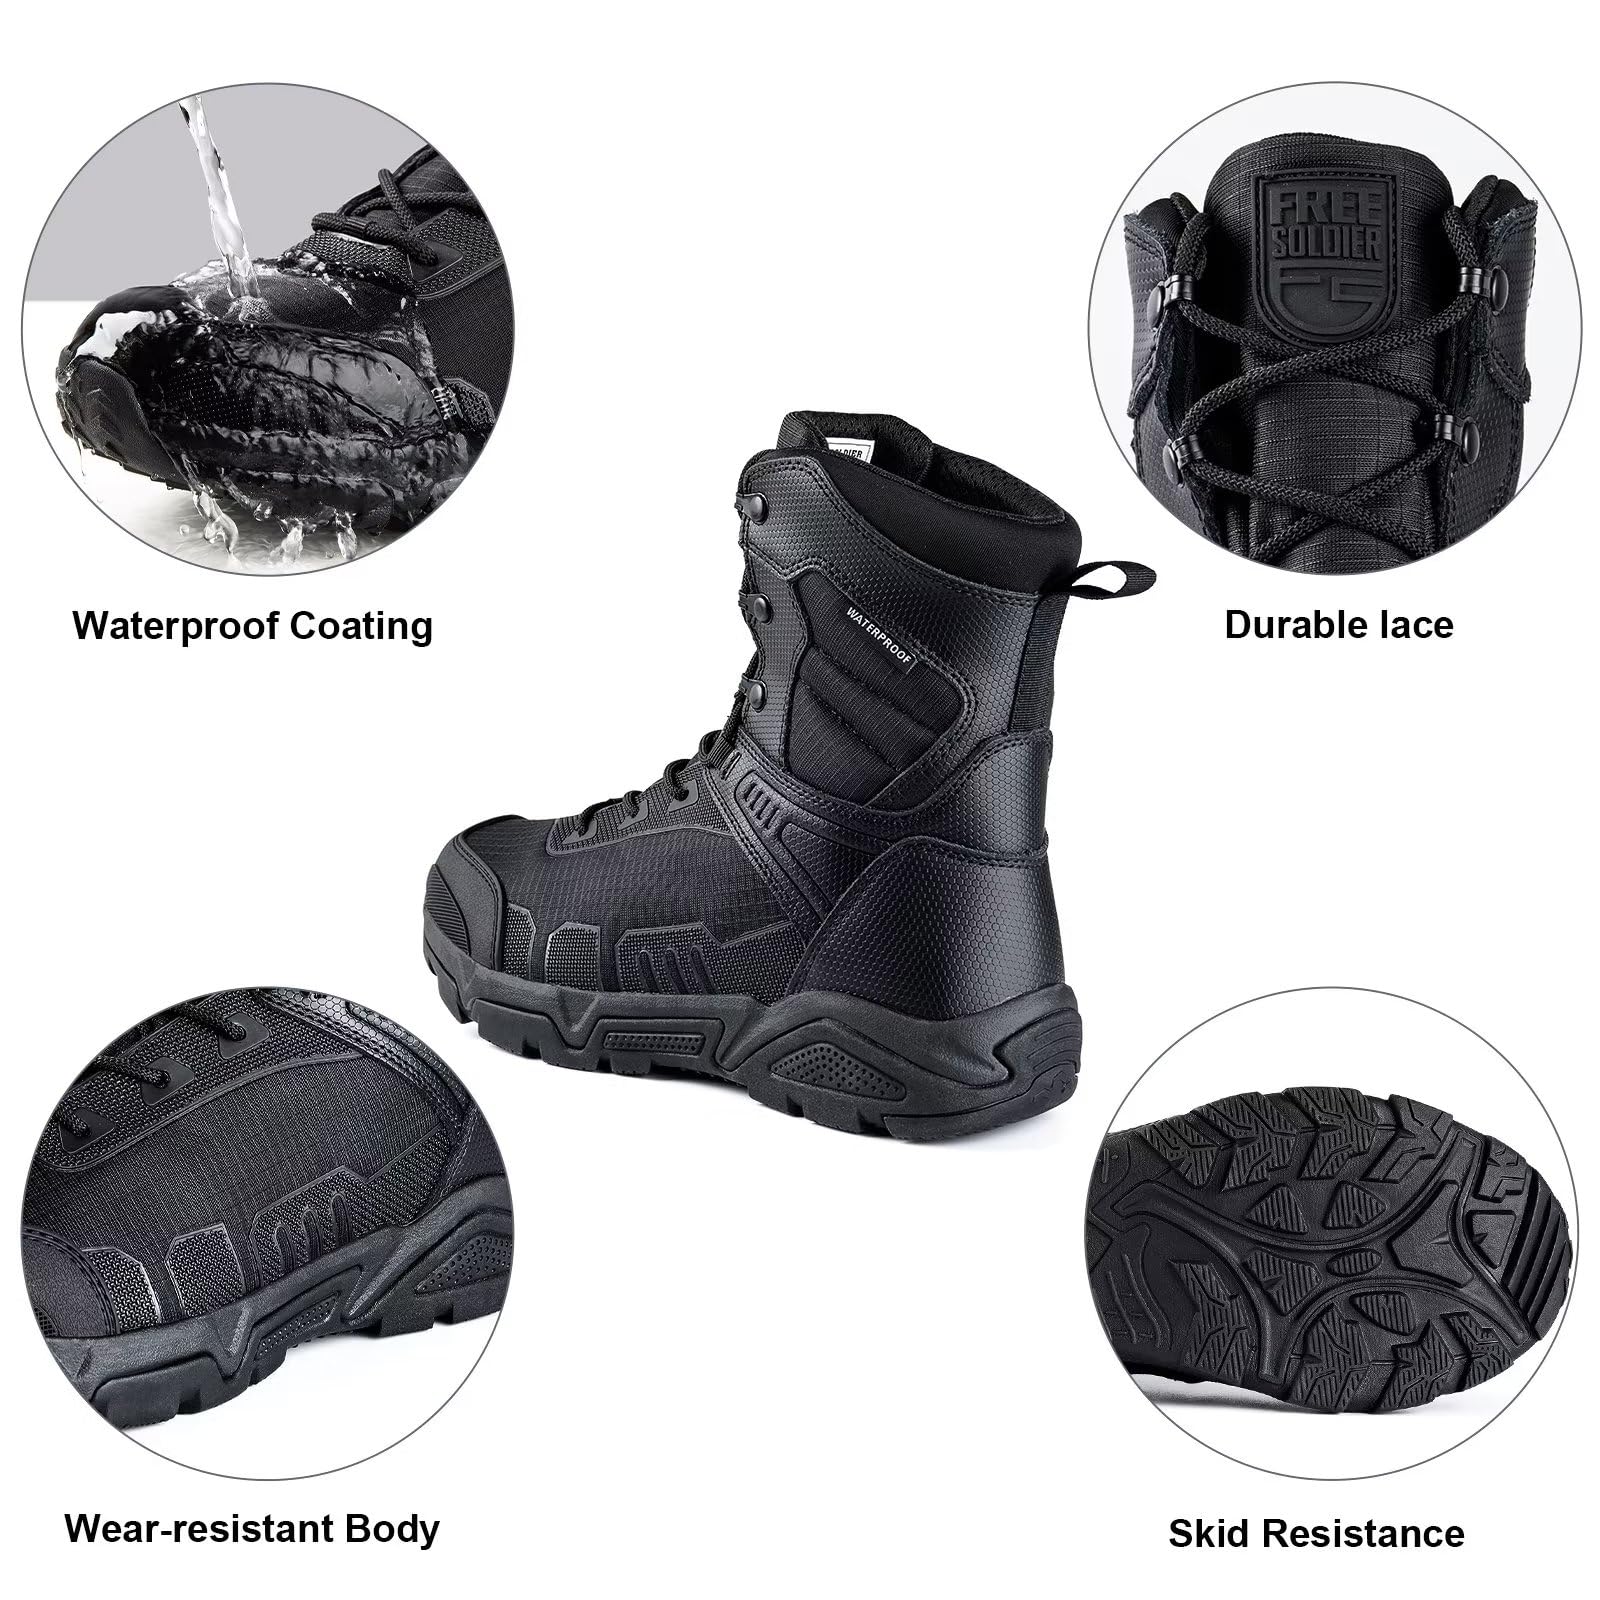 8 inch Durable Work Boots - FreeSoldier